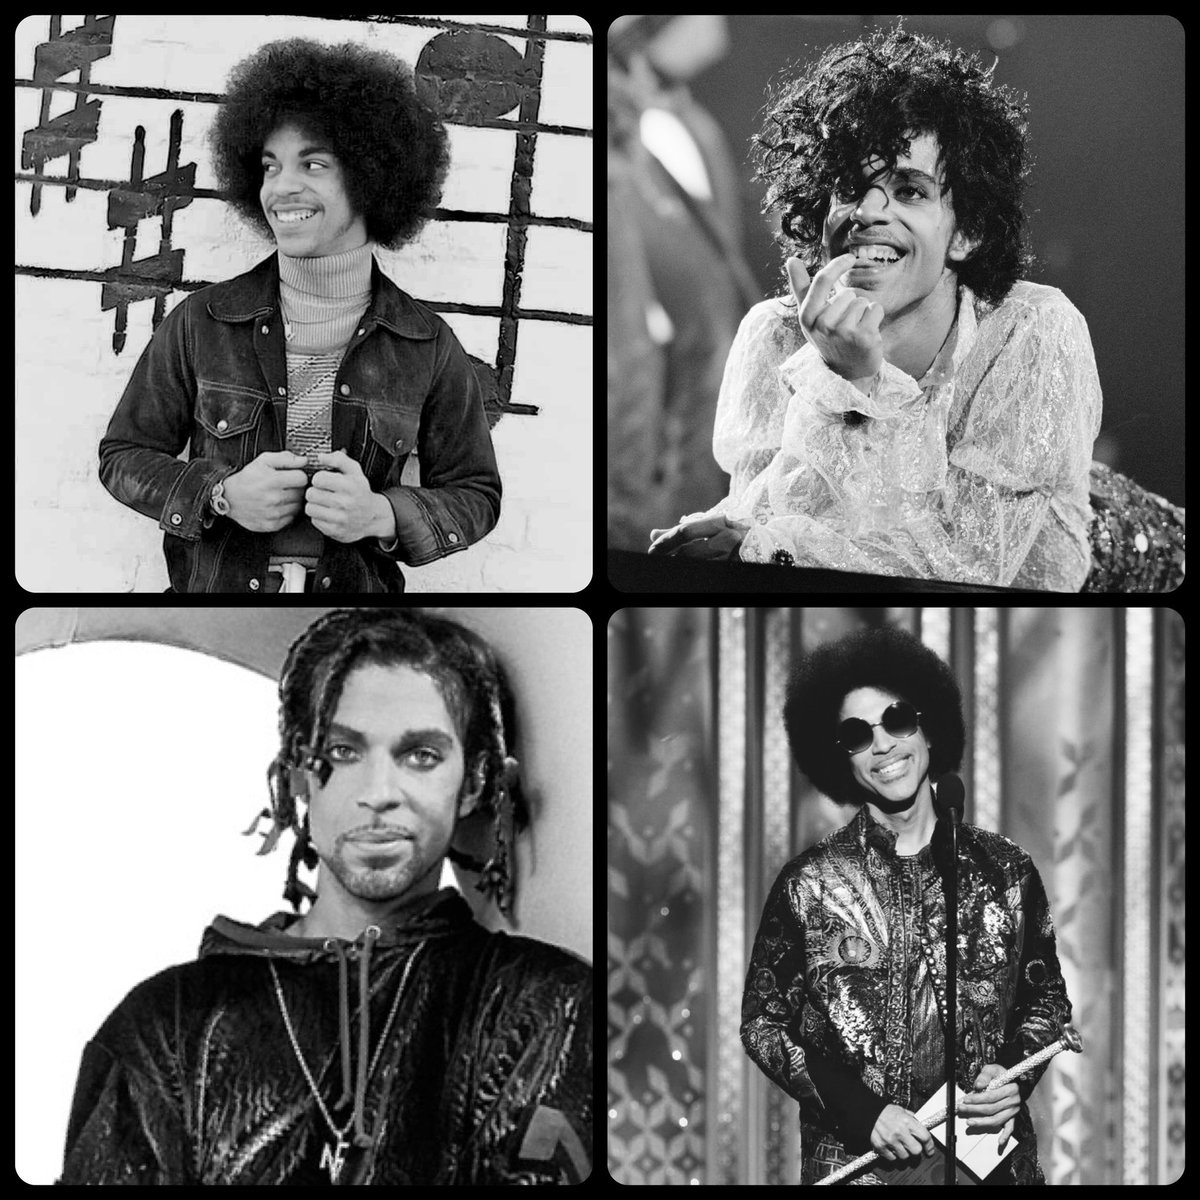 Remembering @Prince - and the lifetime of music he gave us - on what would have been his 65th birthday. #Prince #Prince4Ever 🎼💜🎶